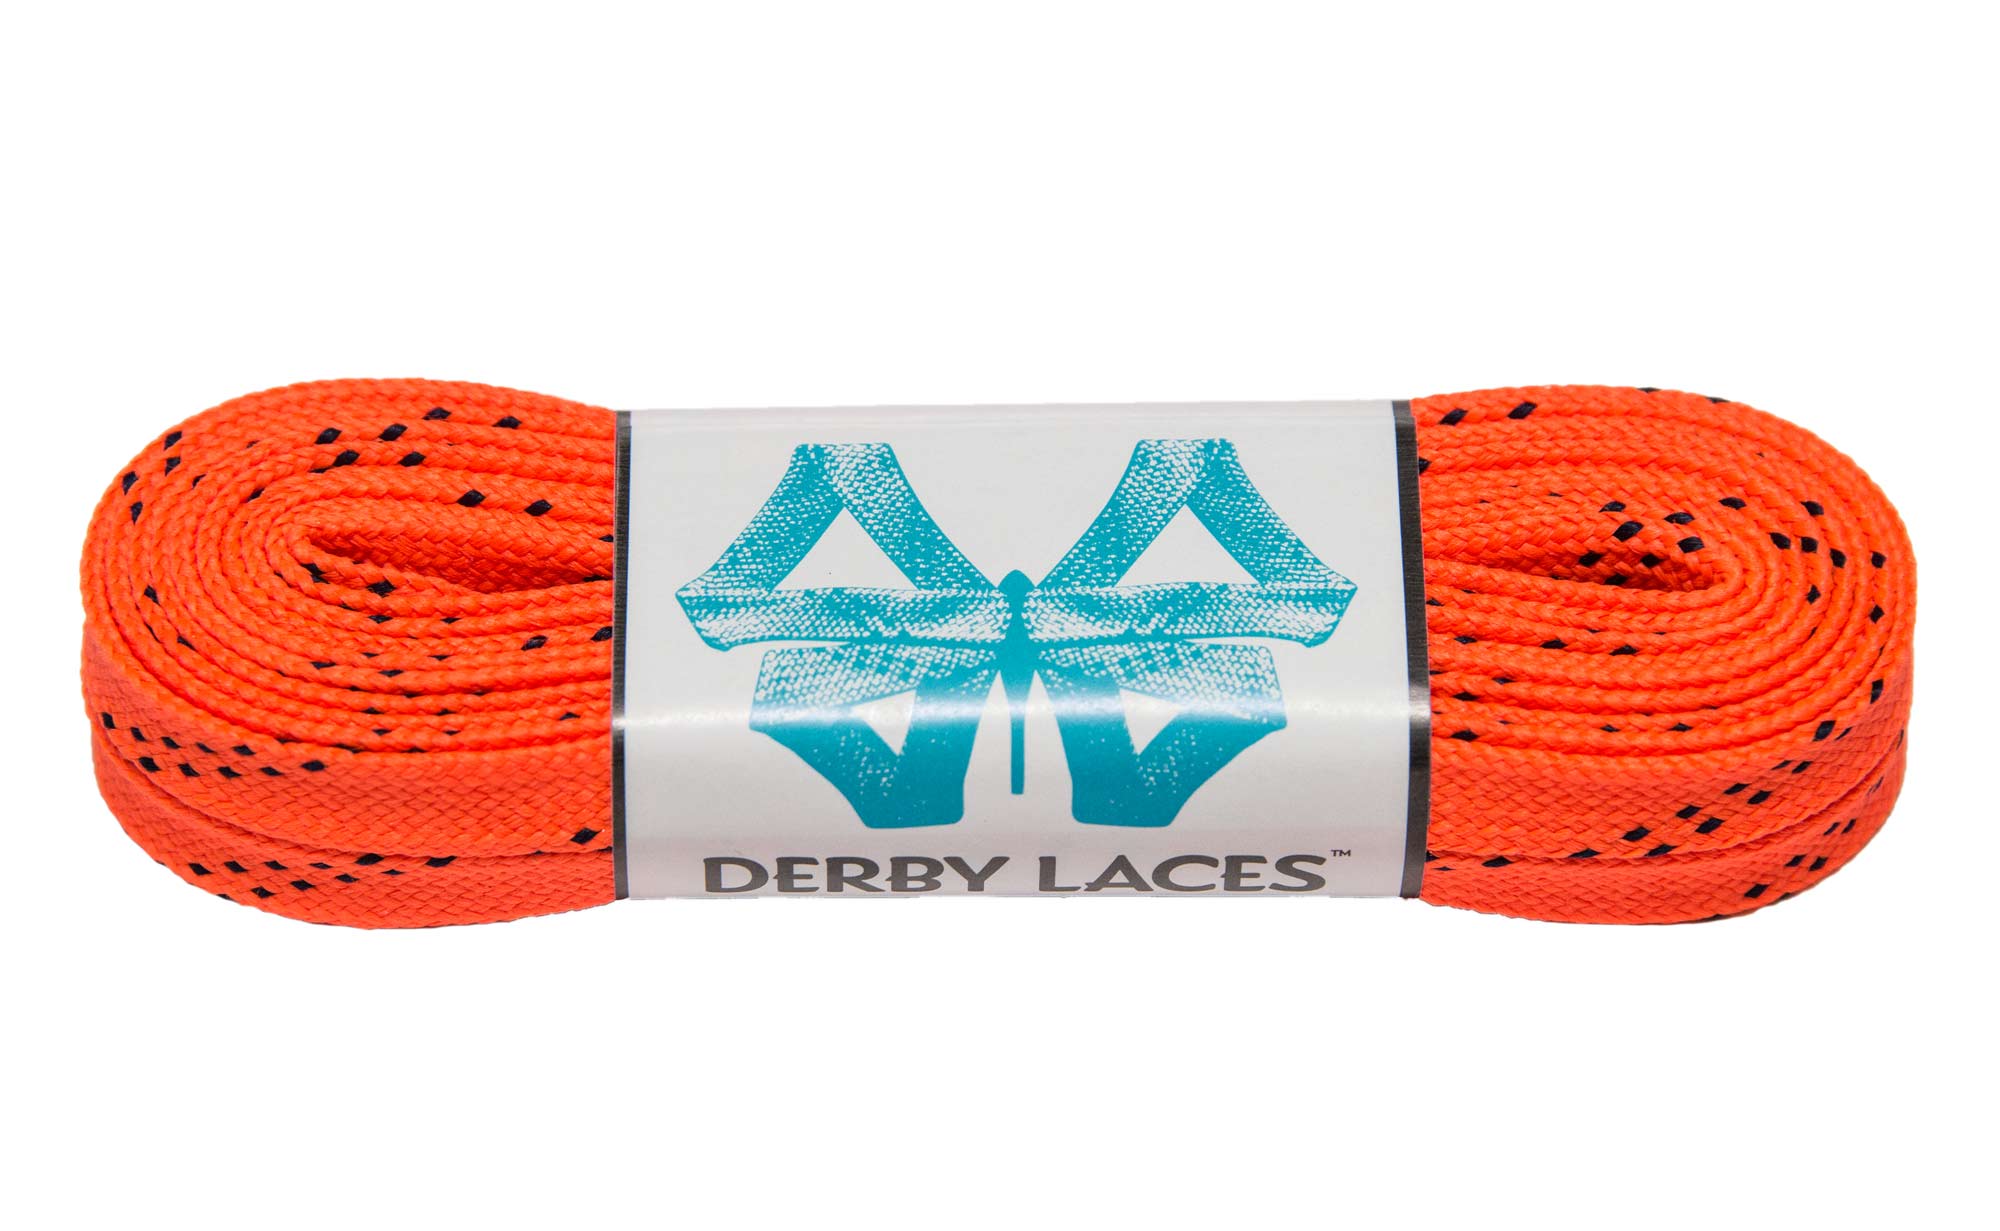 Black Derby Laces Waxed Roller Derby Skate Lace in 60 72 96 84 or 108 Inches 